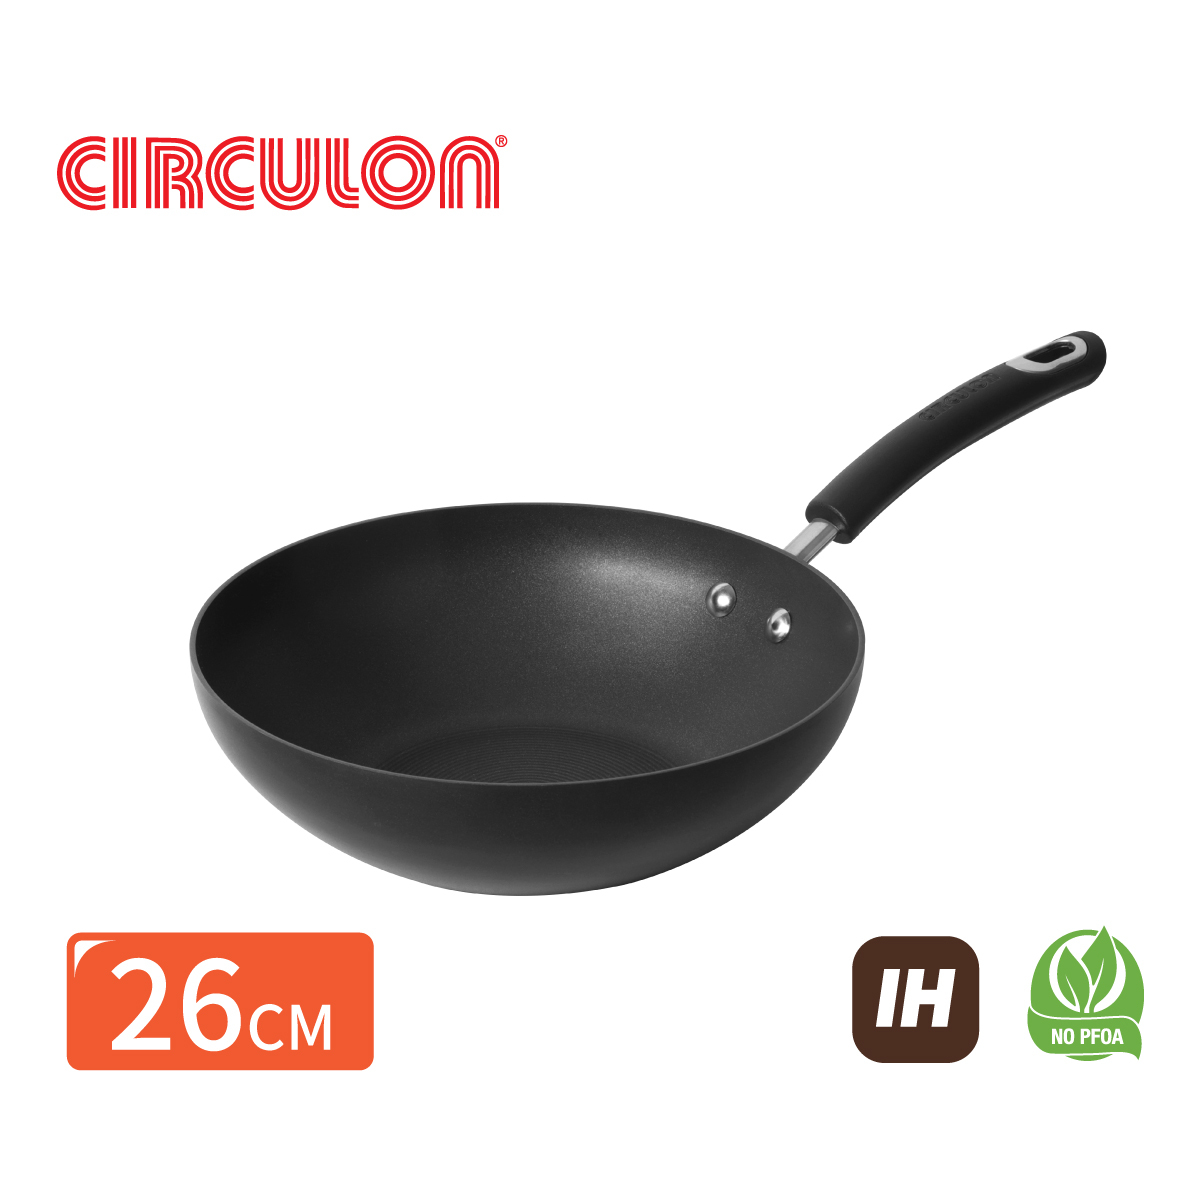 (Induction) 26CM OPEN STIRFRY-CIRCULON TOTAL (#83923-T)